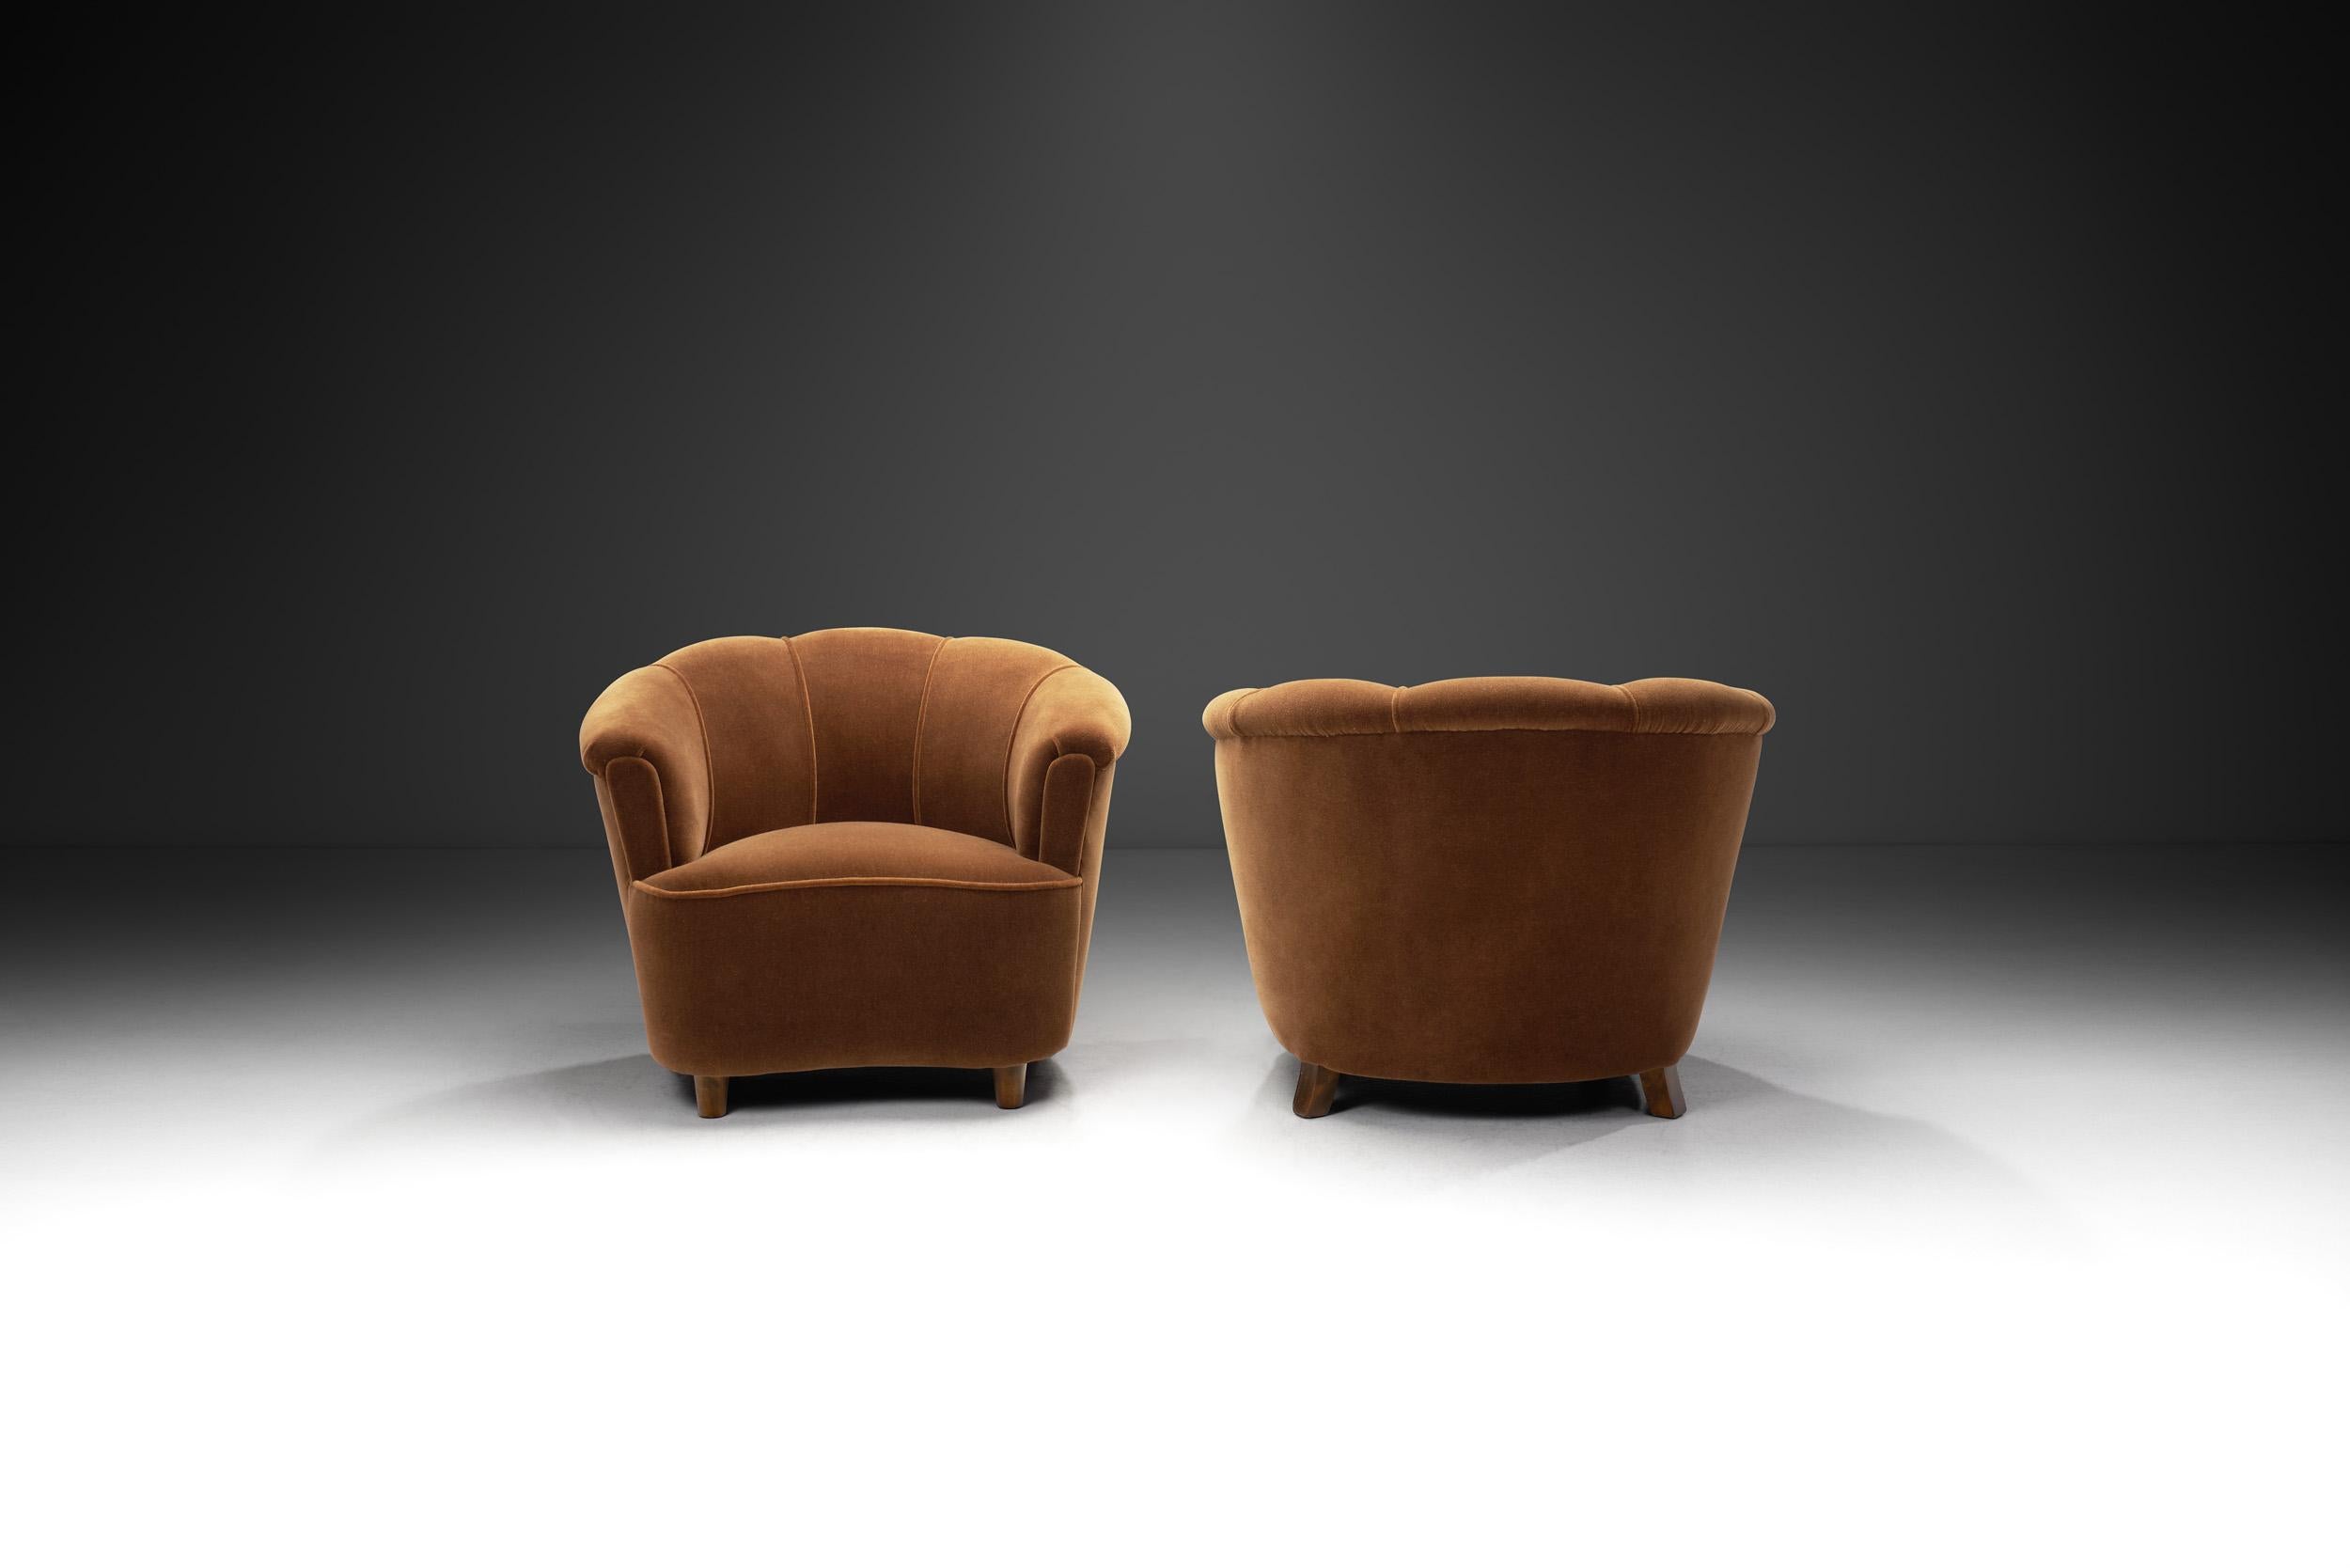 Mid-20th Century Swedish Upholstered Lounge Chairs, Sweden, 1940s